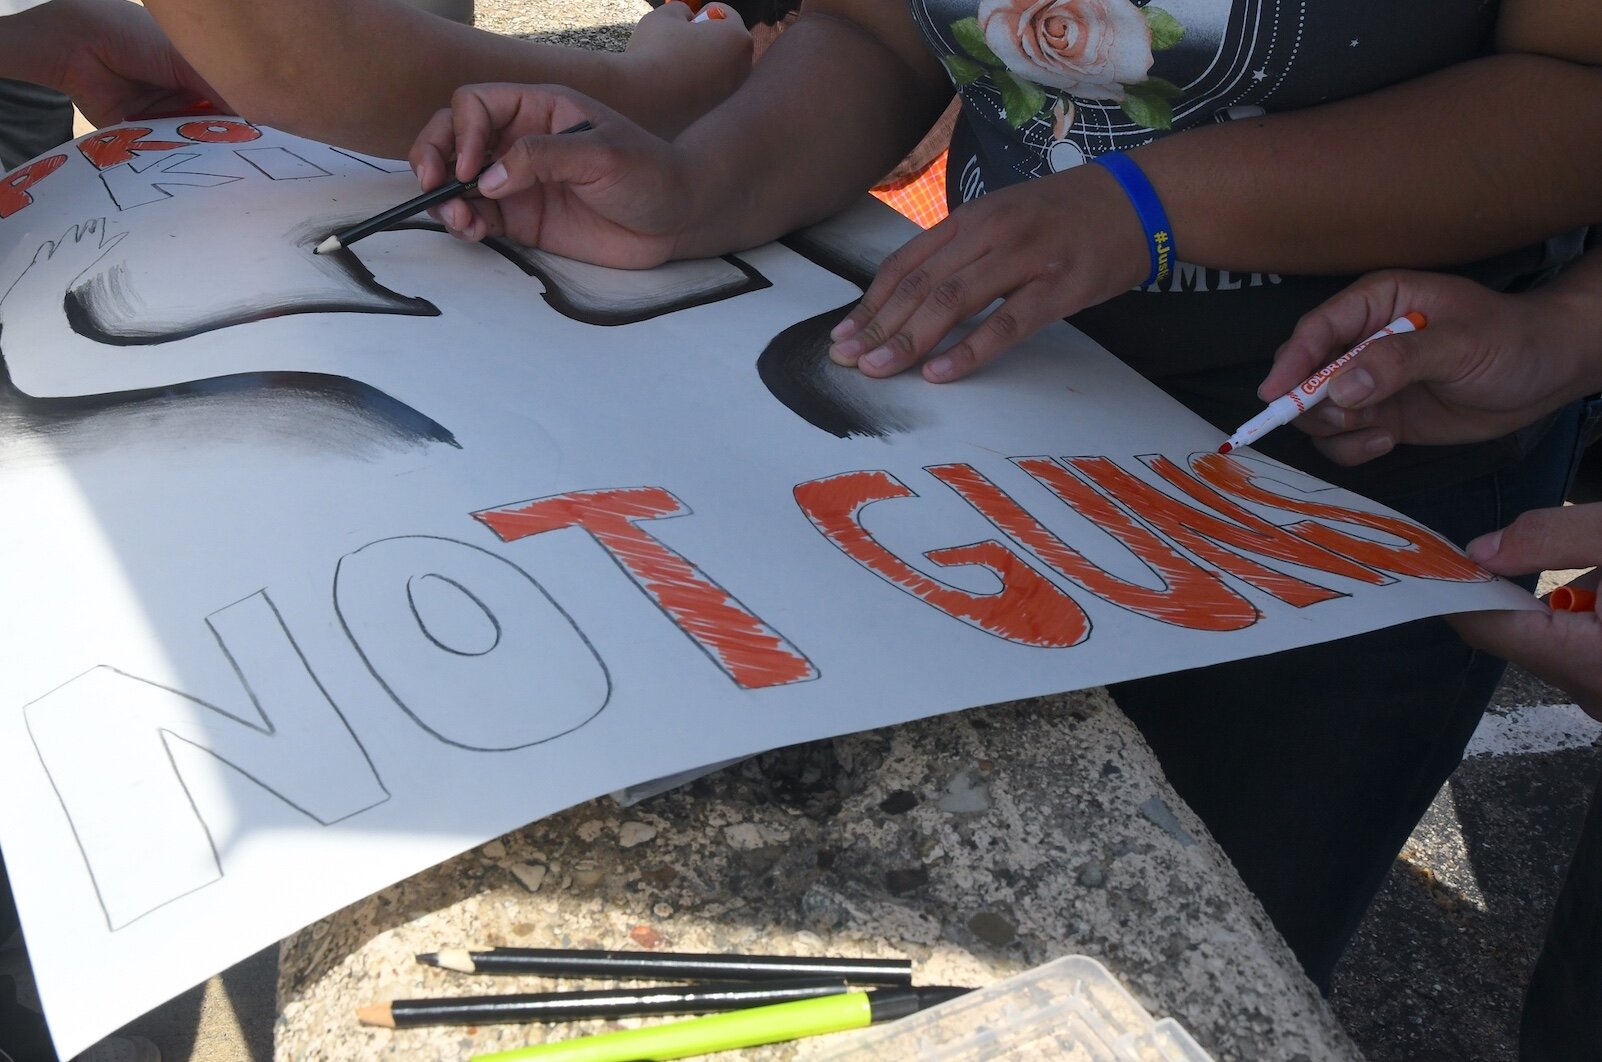 People prepare signs before an organizer of an anti-gun violence march and rally in downtown Battle Creek.